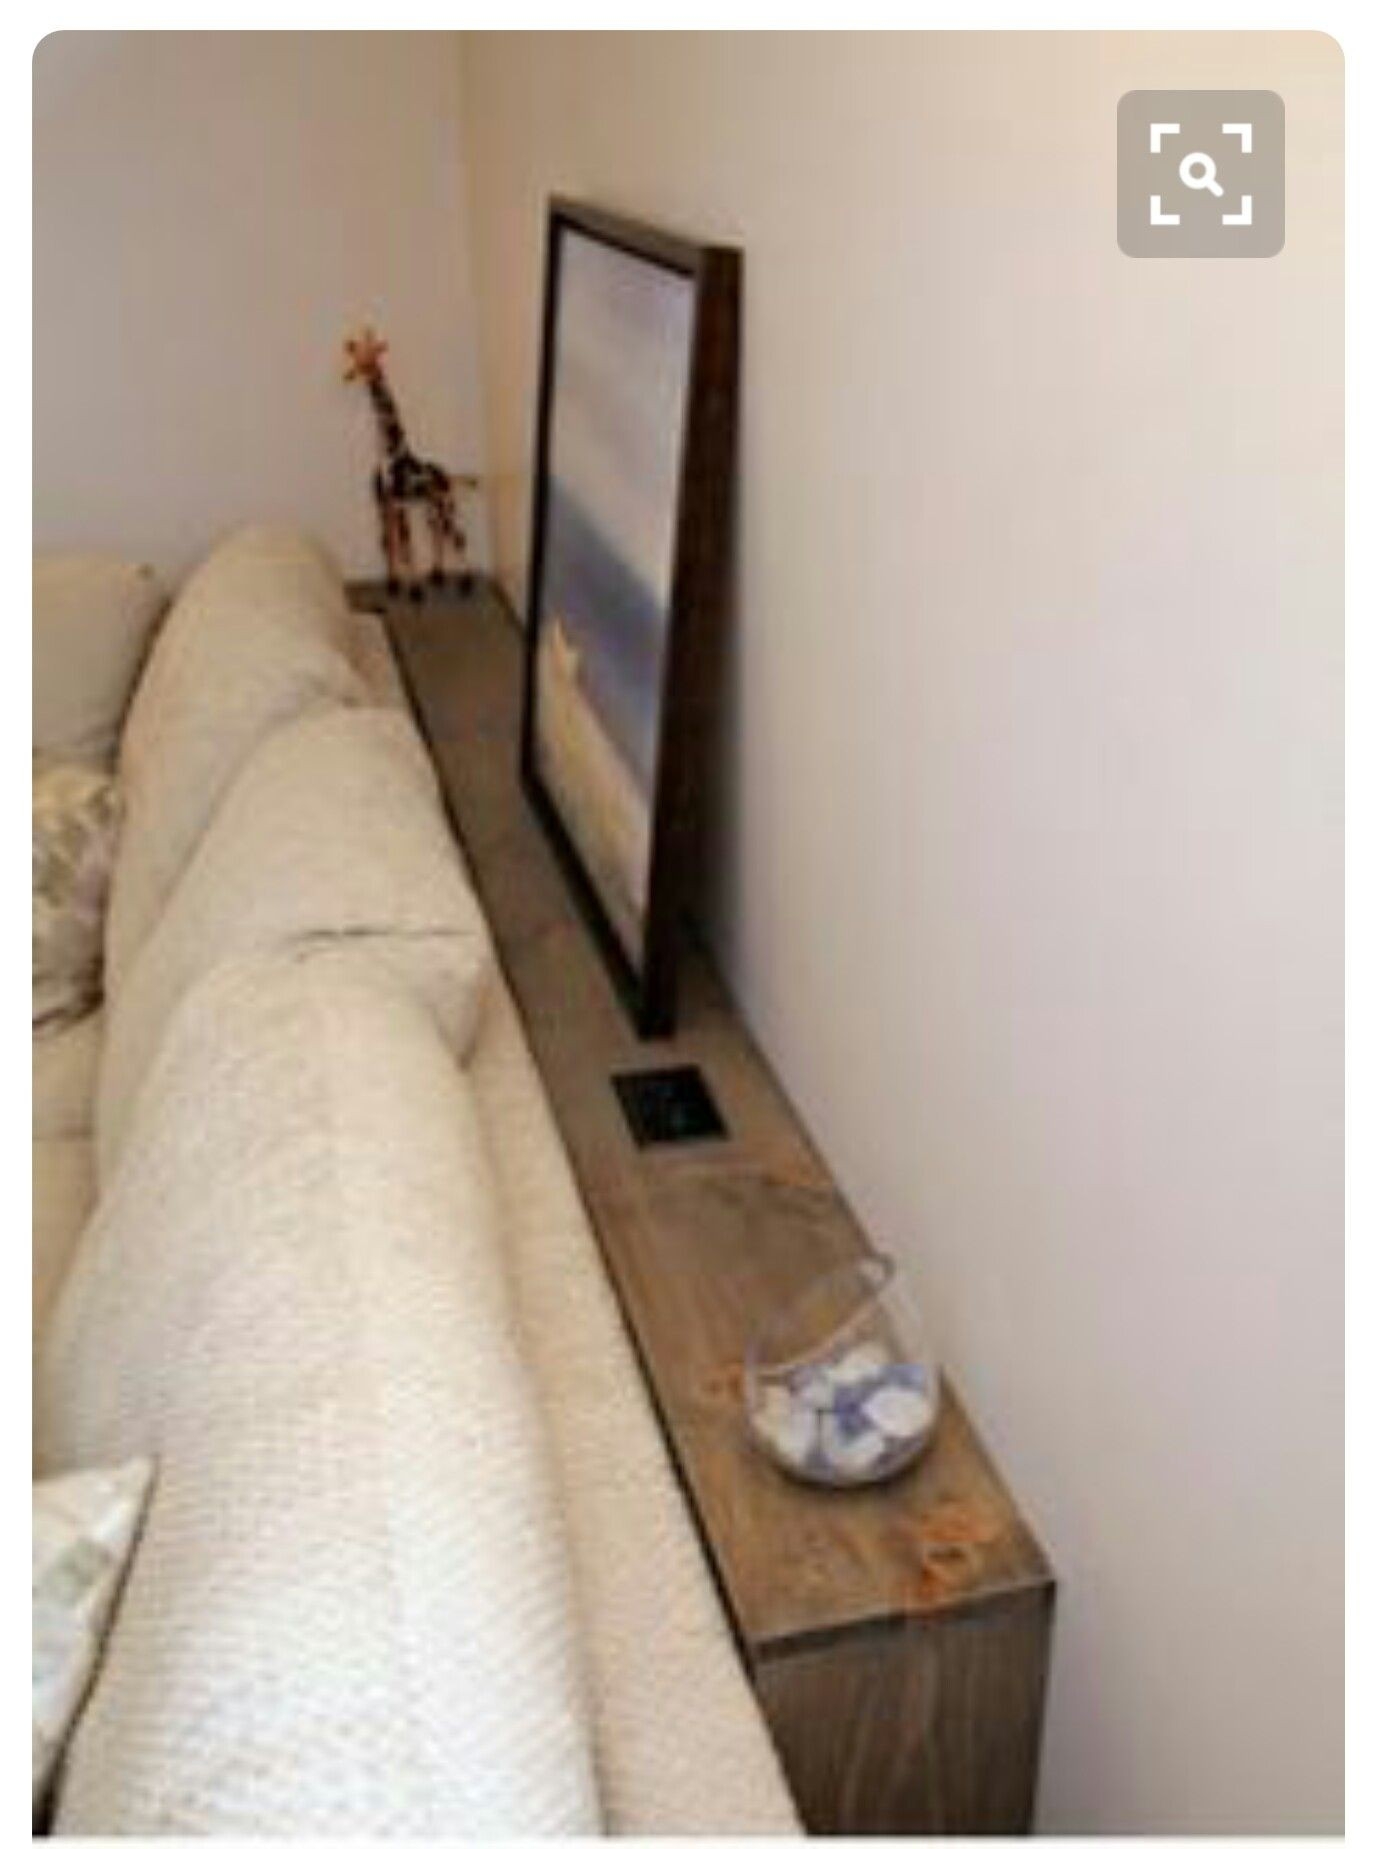 6 inch wide sofa table